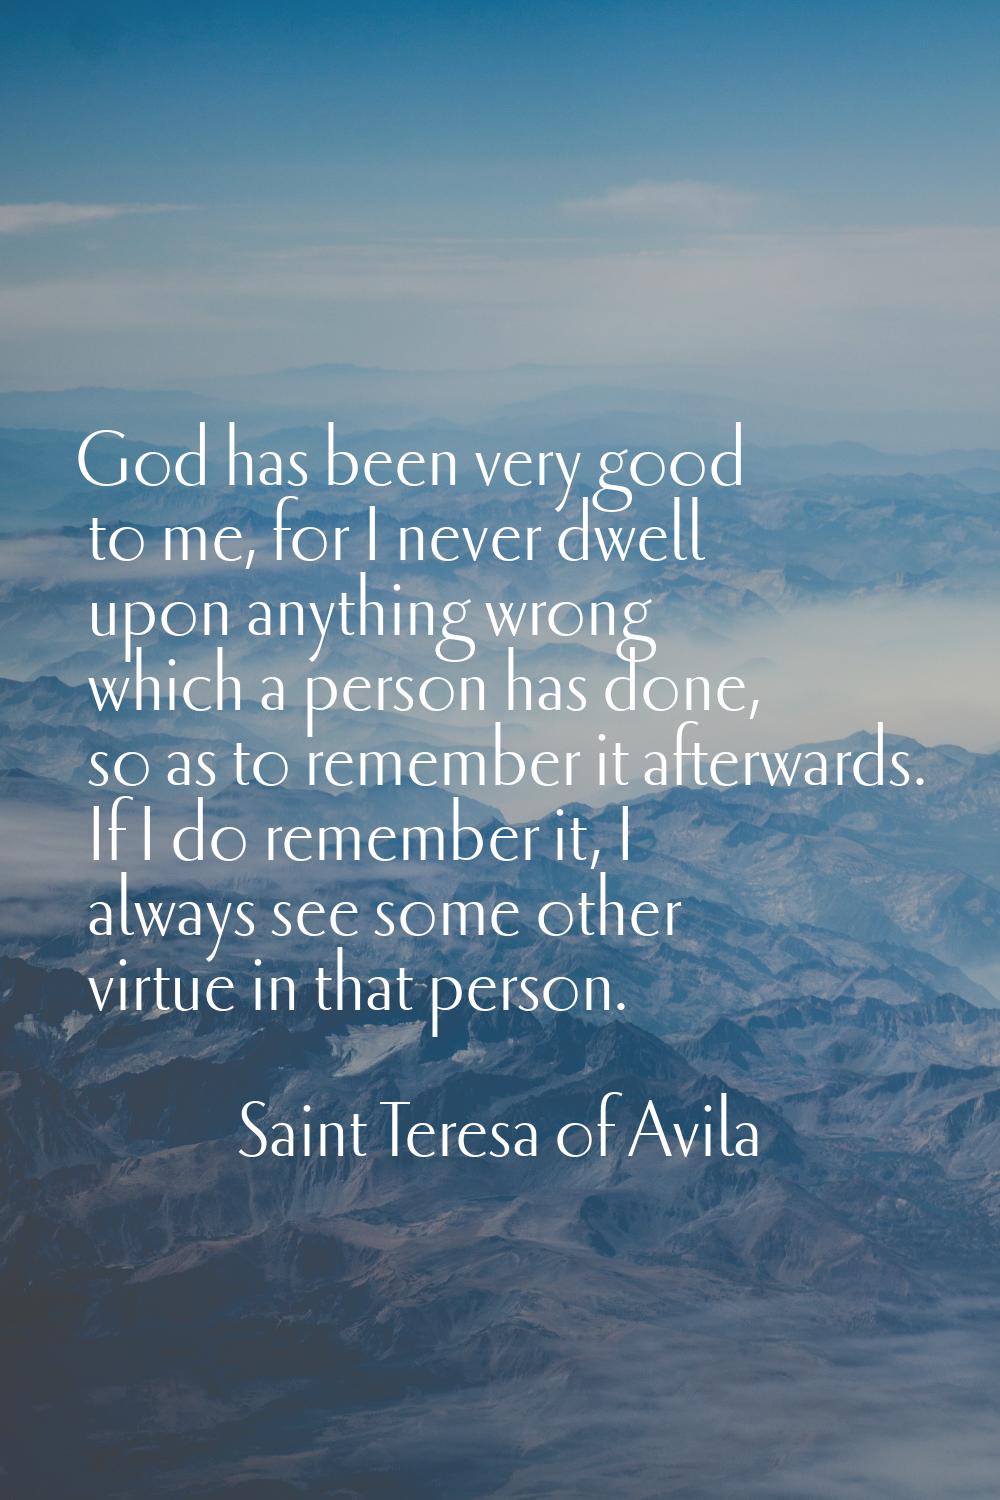 God has been very good to me, for I never dwell upon anything wrong which a person has done, so as 